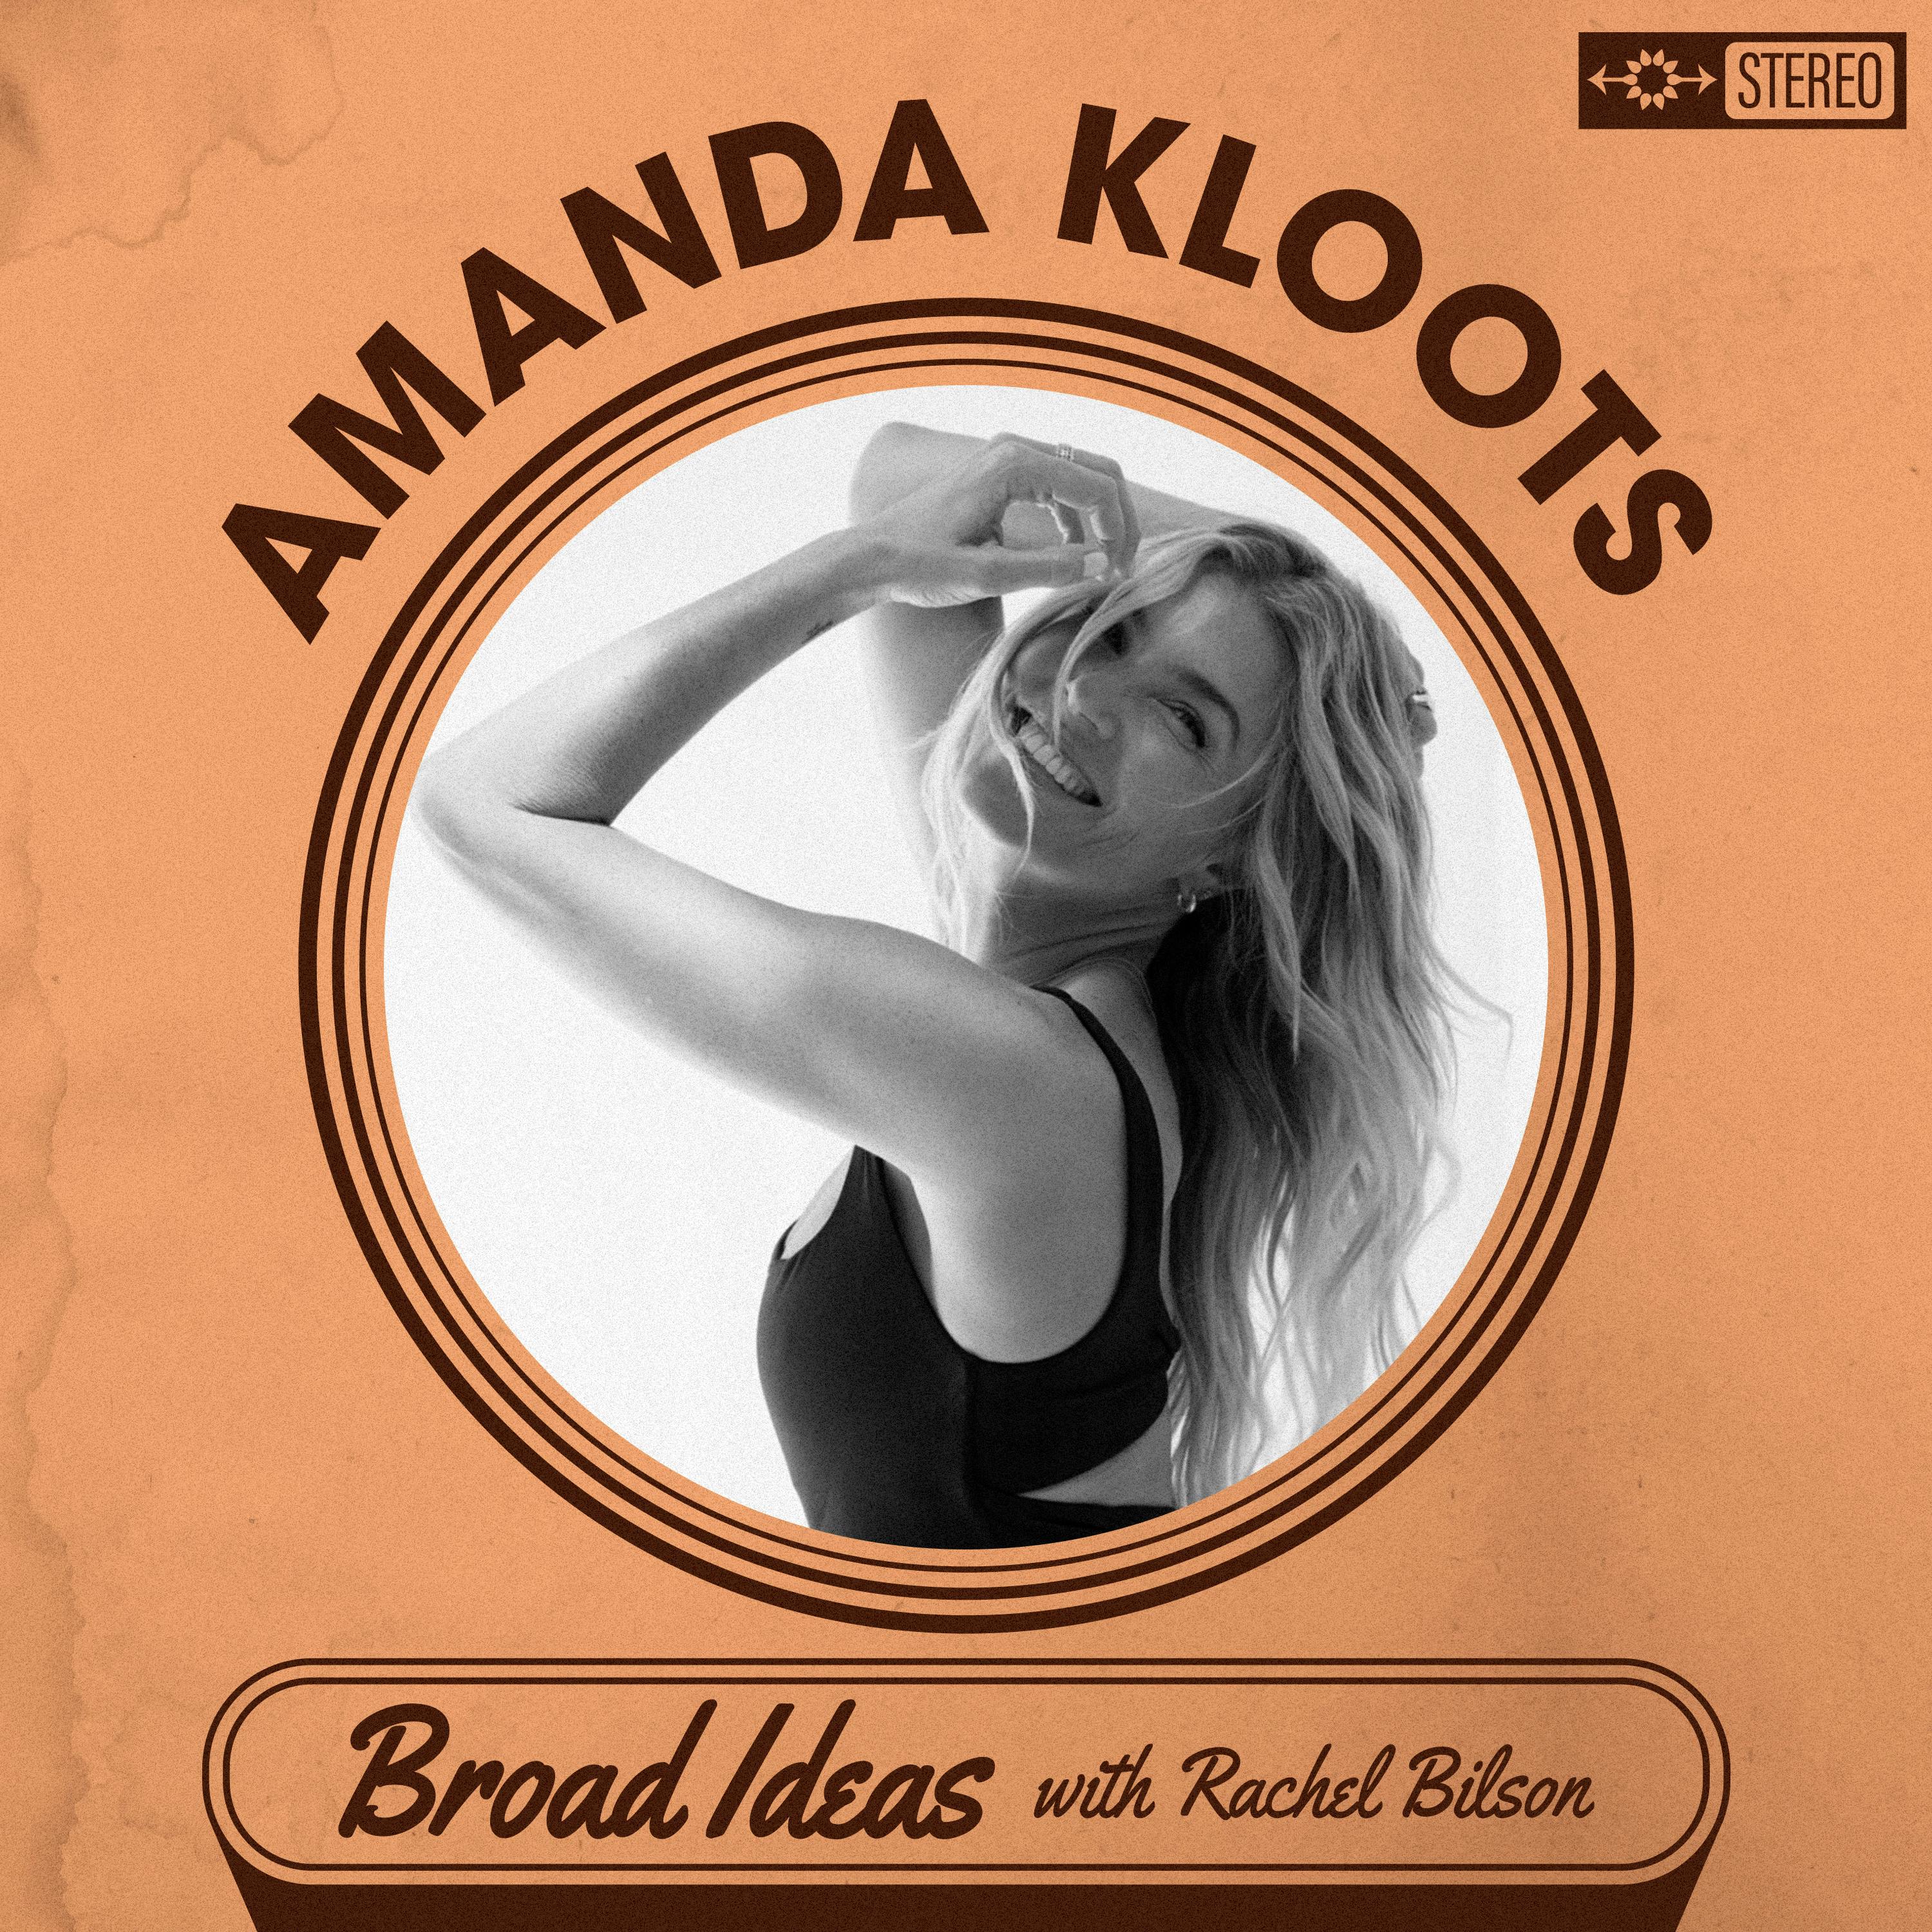 Amanda Kloots on Dating as a Widow, and L.A. Men